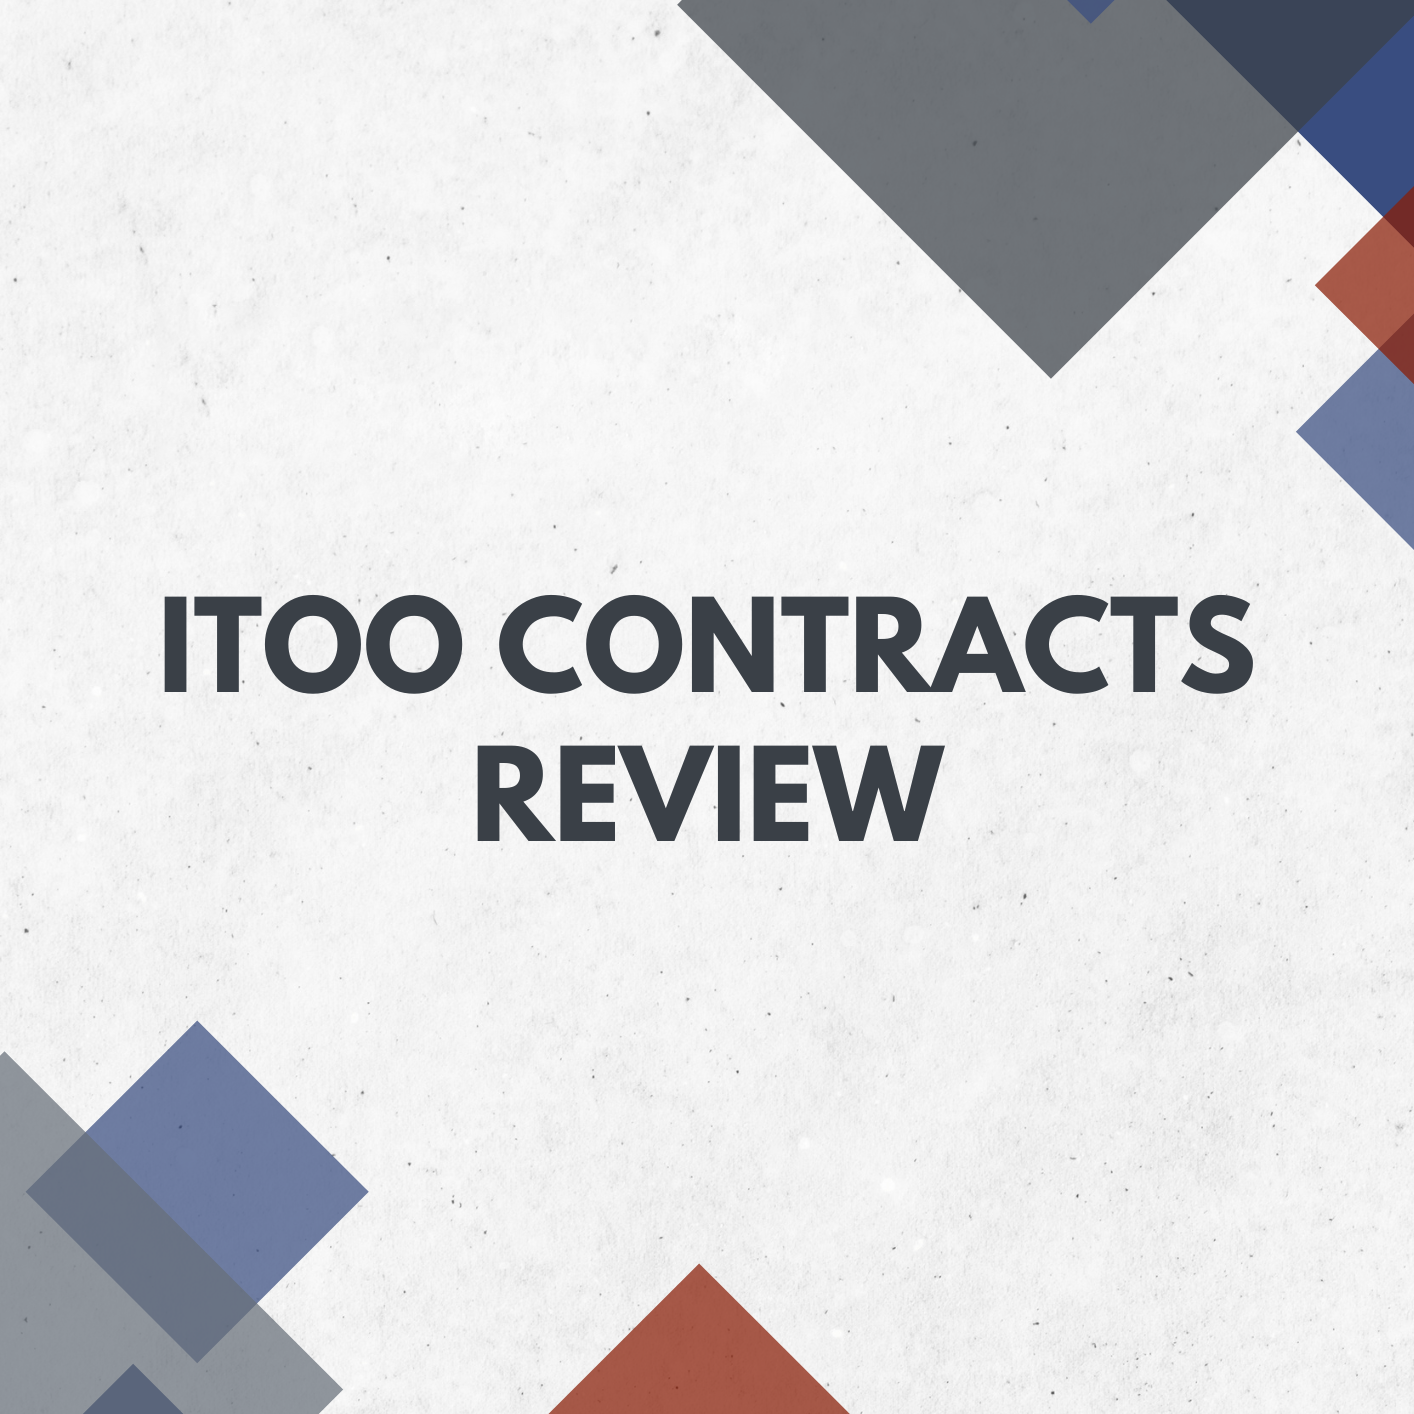 ITOO Contracts Review